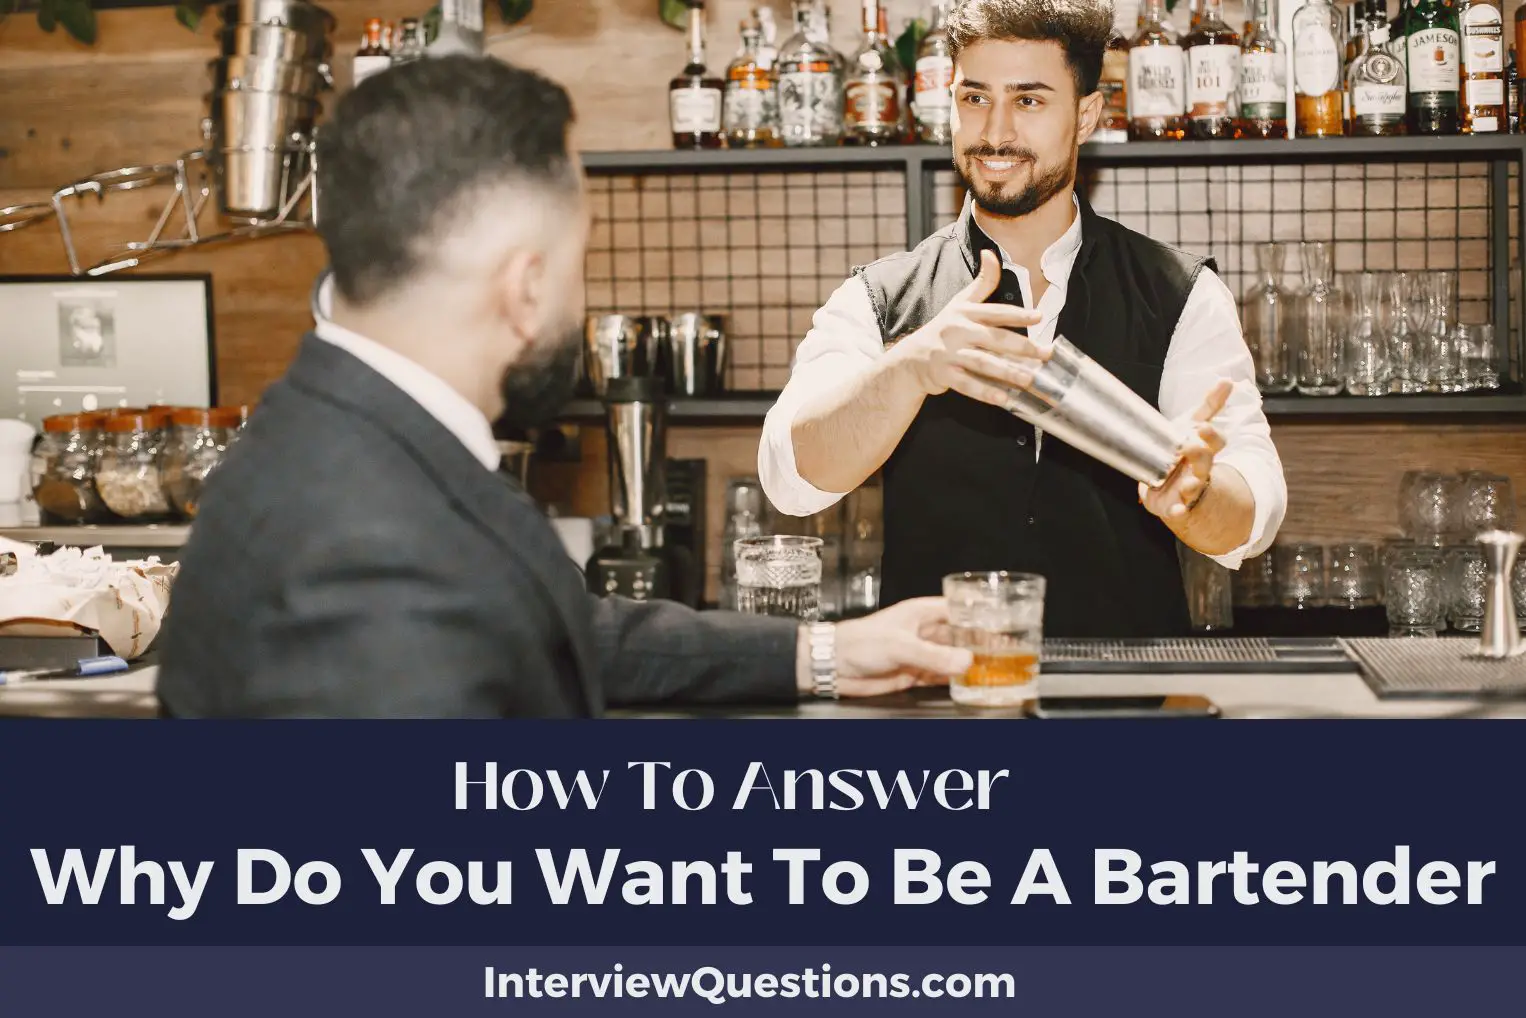 Why Do You Want To Be A Bartender